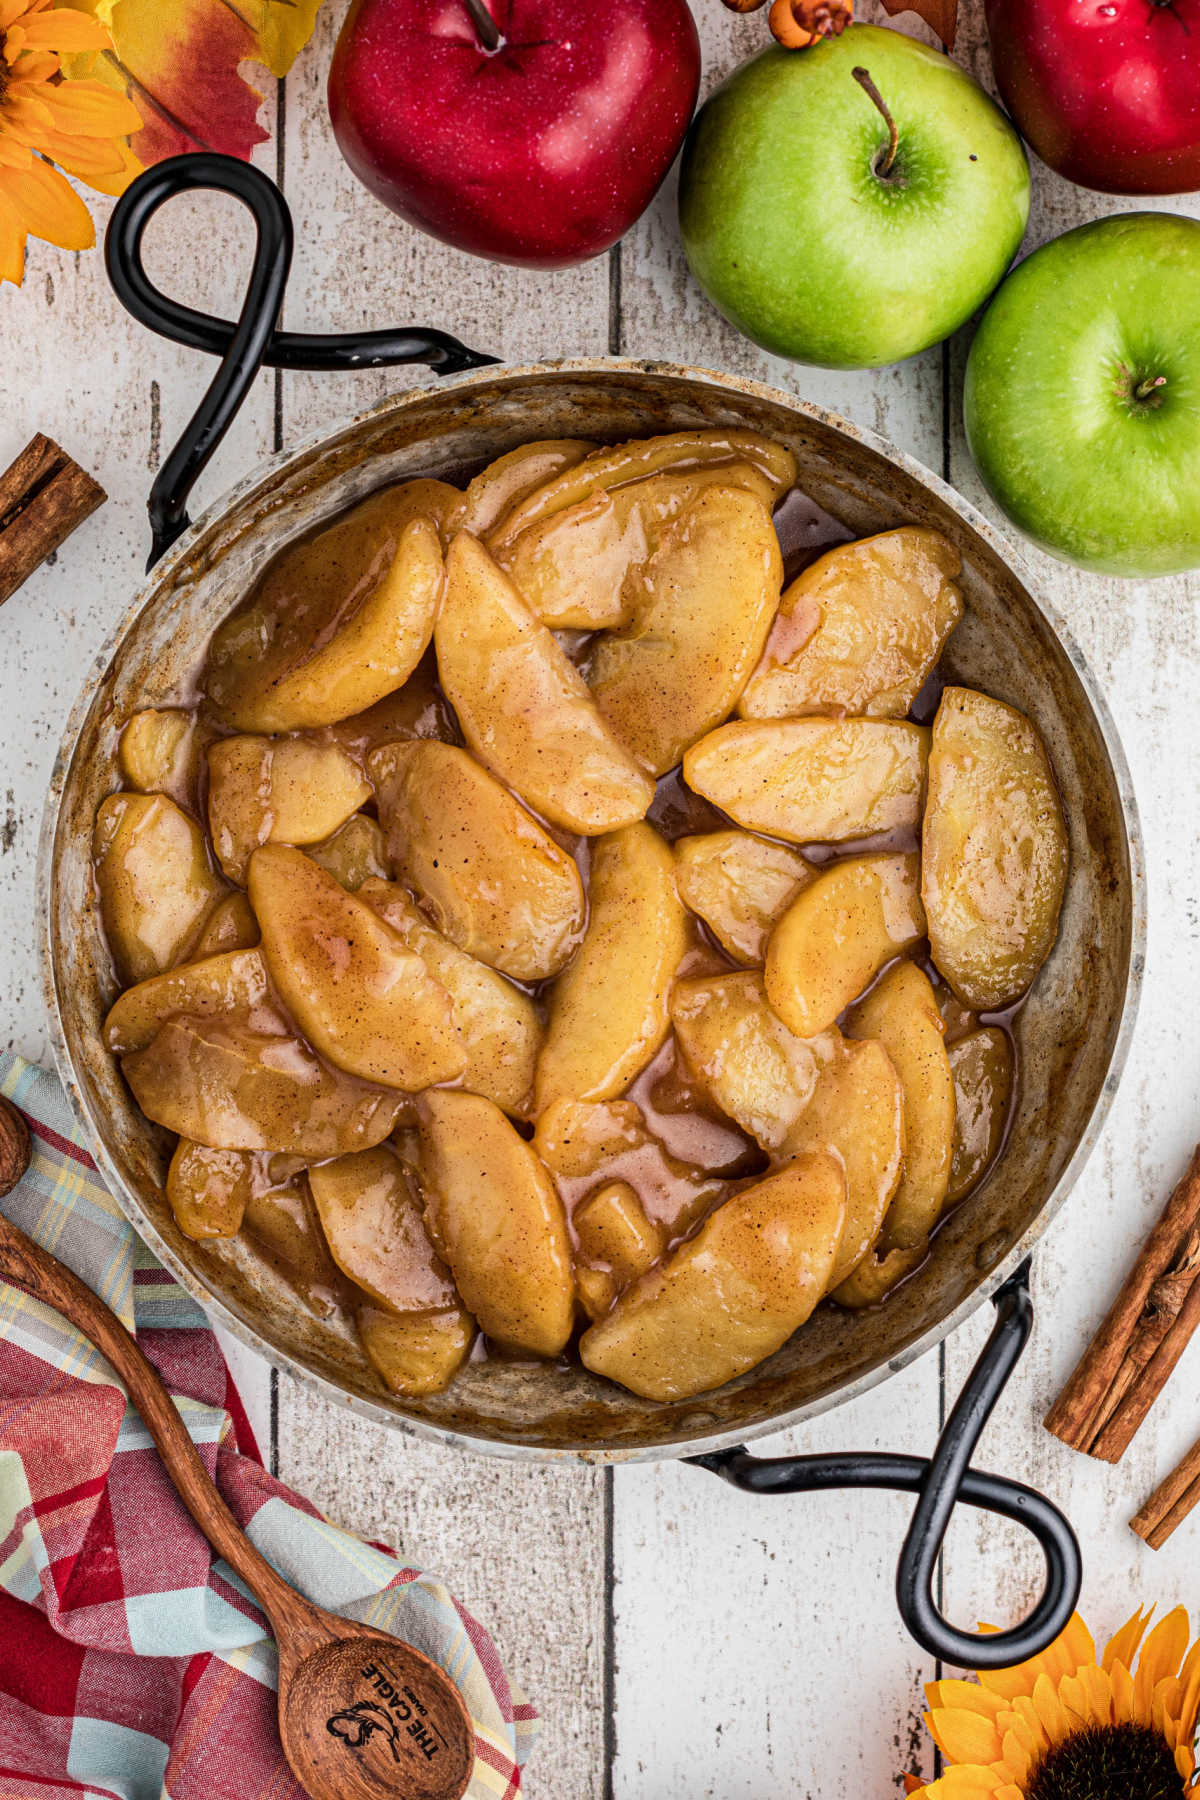 Overhead shot of a pan full of fried apples.